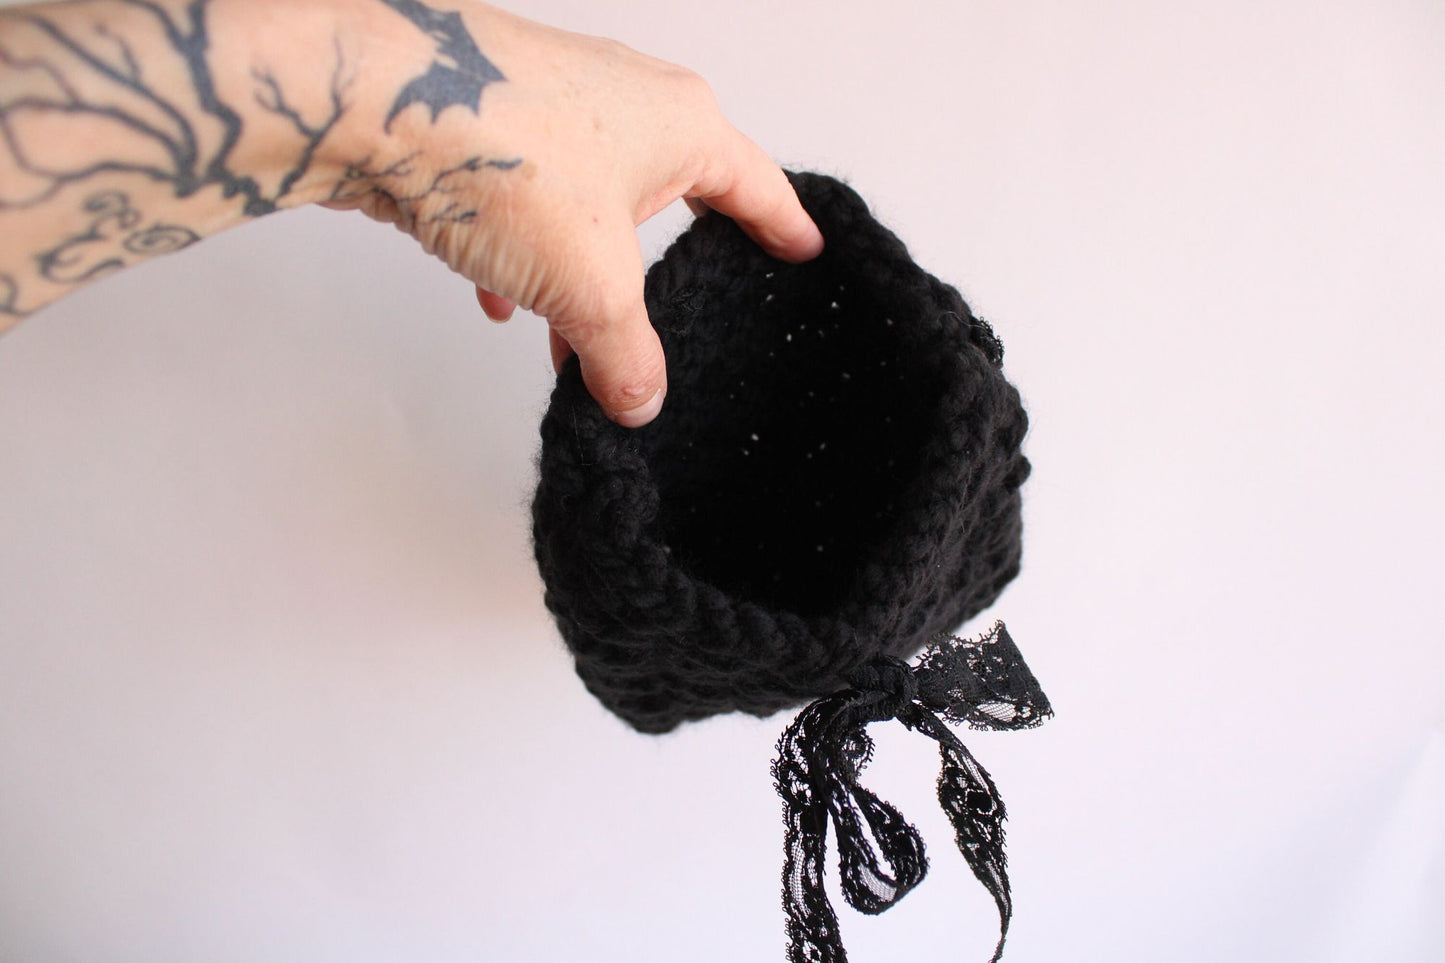 "Shadow" Hand Knit Book Pouch or Cover in Chunky Black Yarn